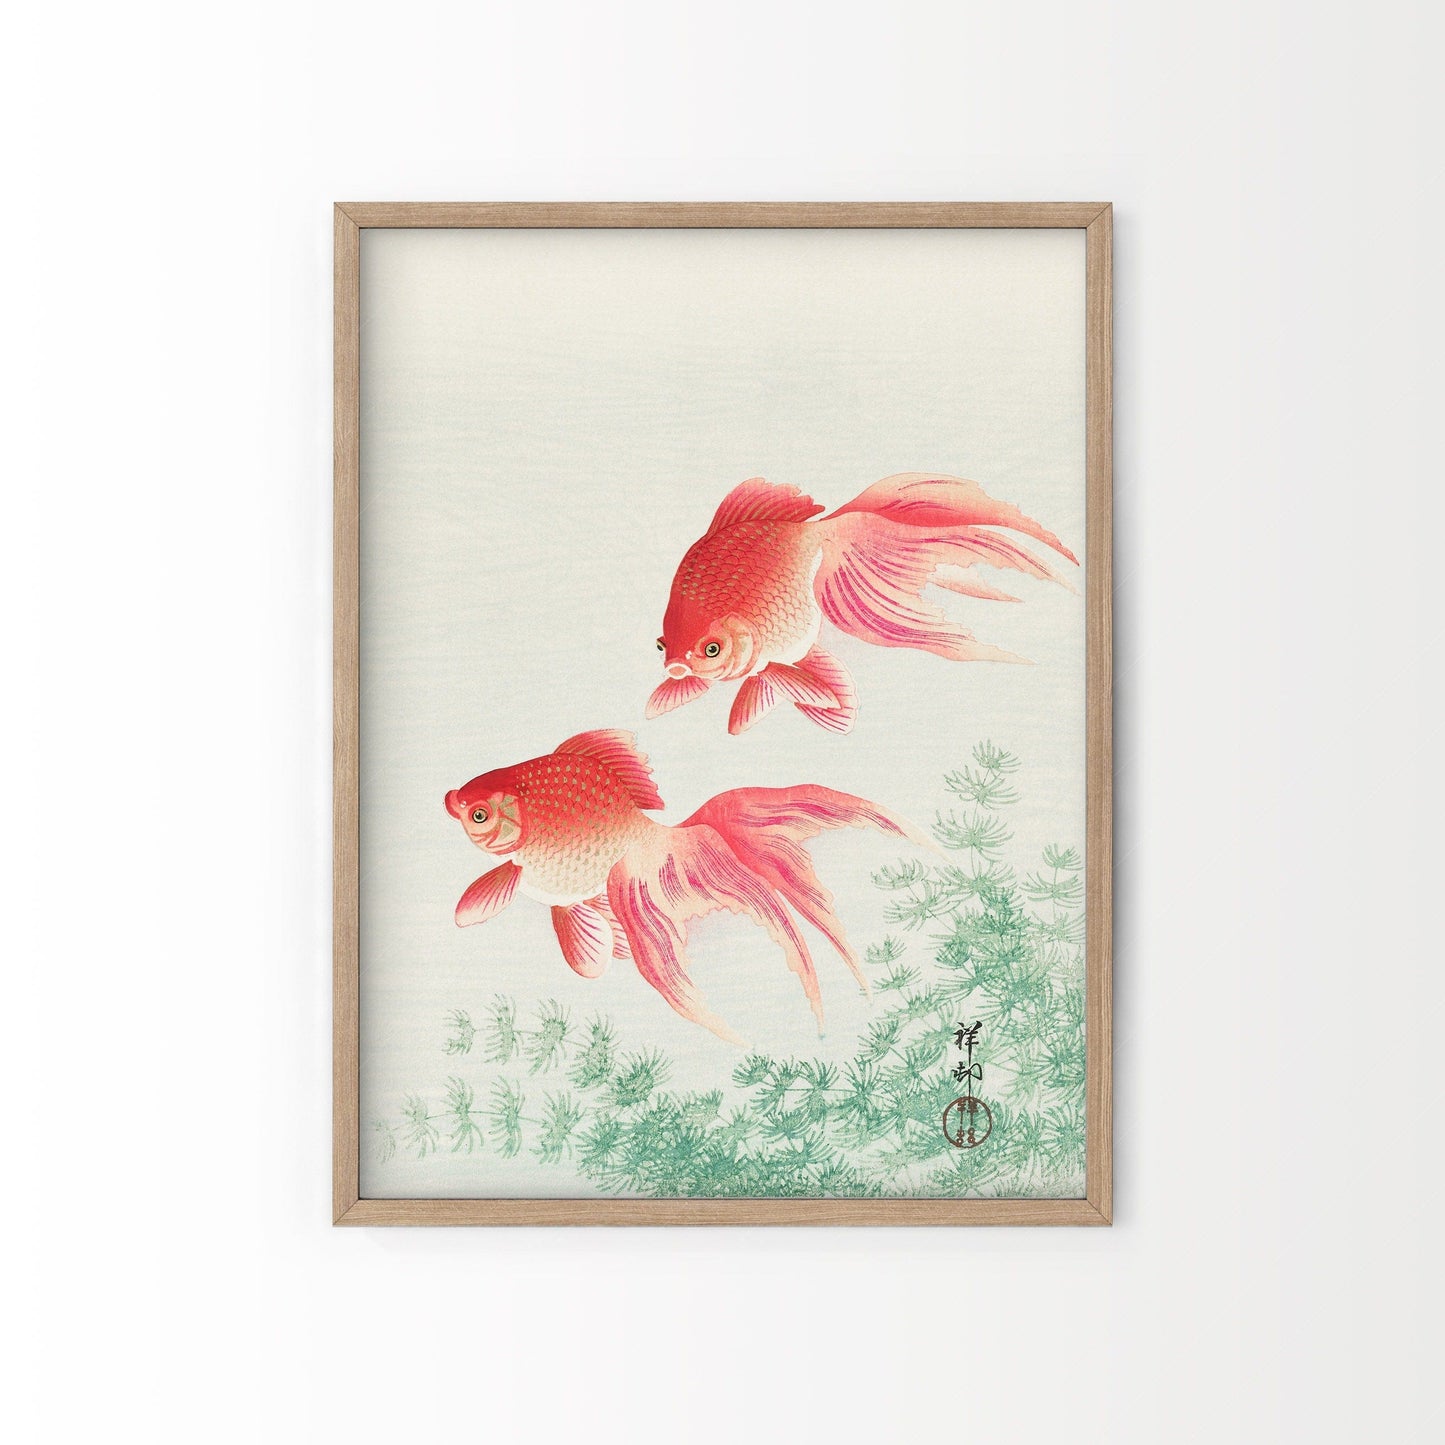 Home Poster Decor Japanese Wall Art, Vintage Poster, Retro Art, Japanese Fish, Goldfish Art, Watercolor Fish, Japan Painting, High Quality Archival Paper